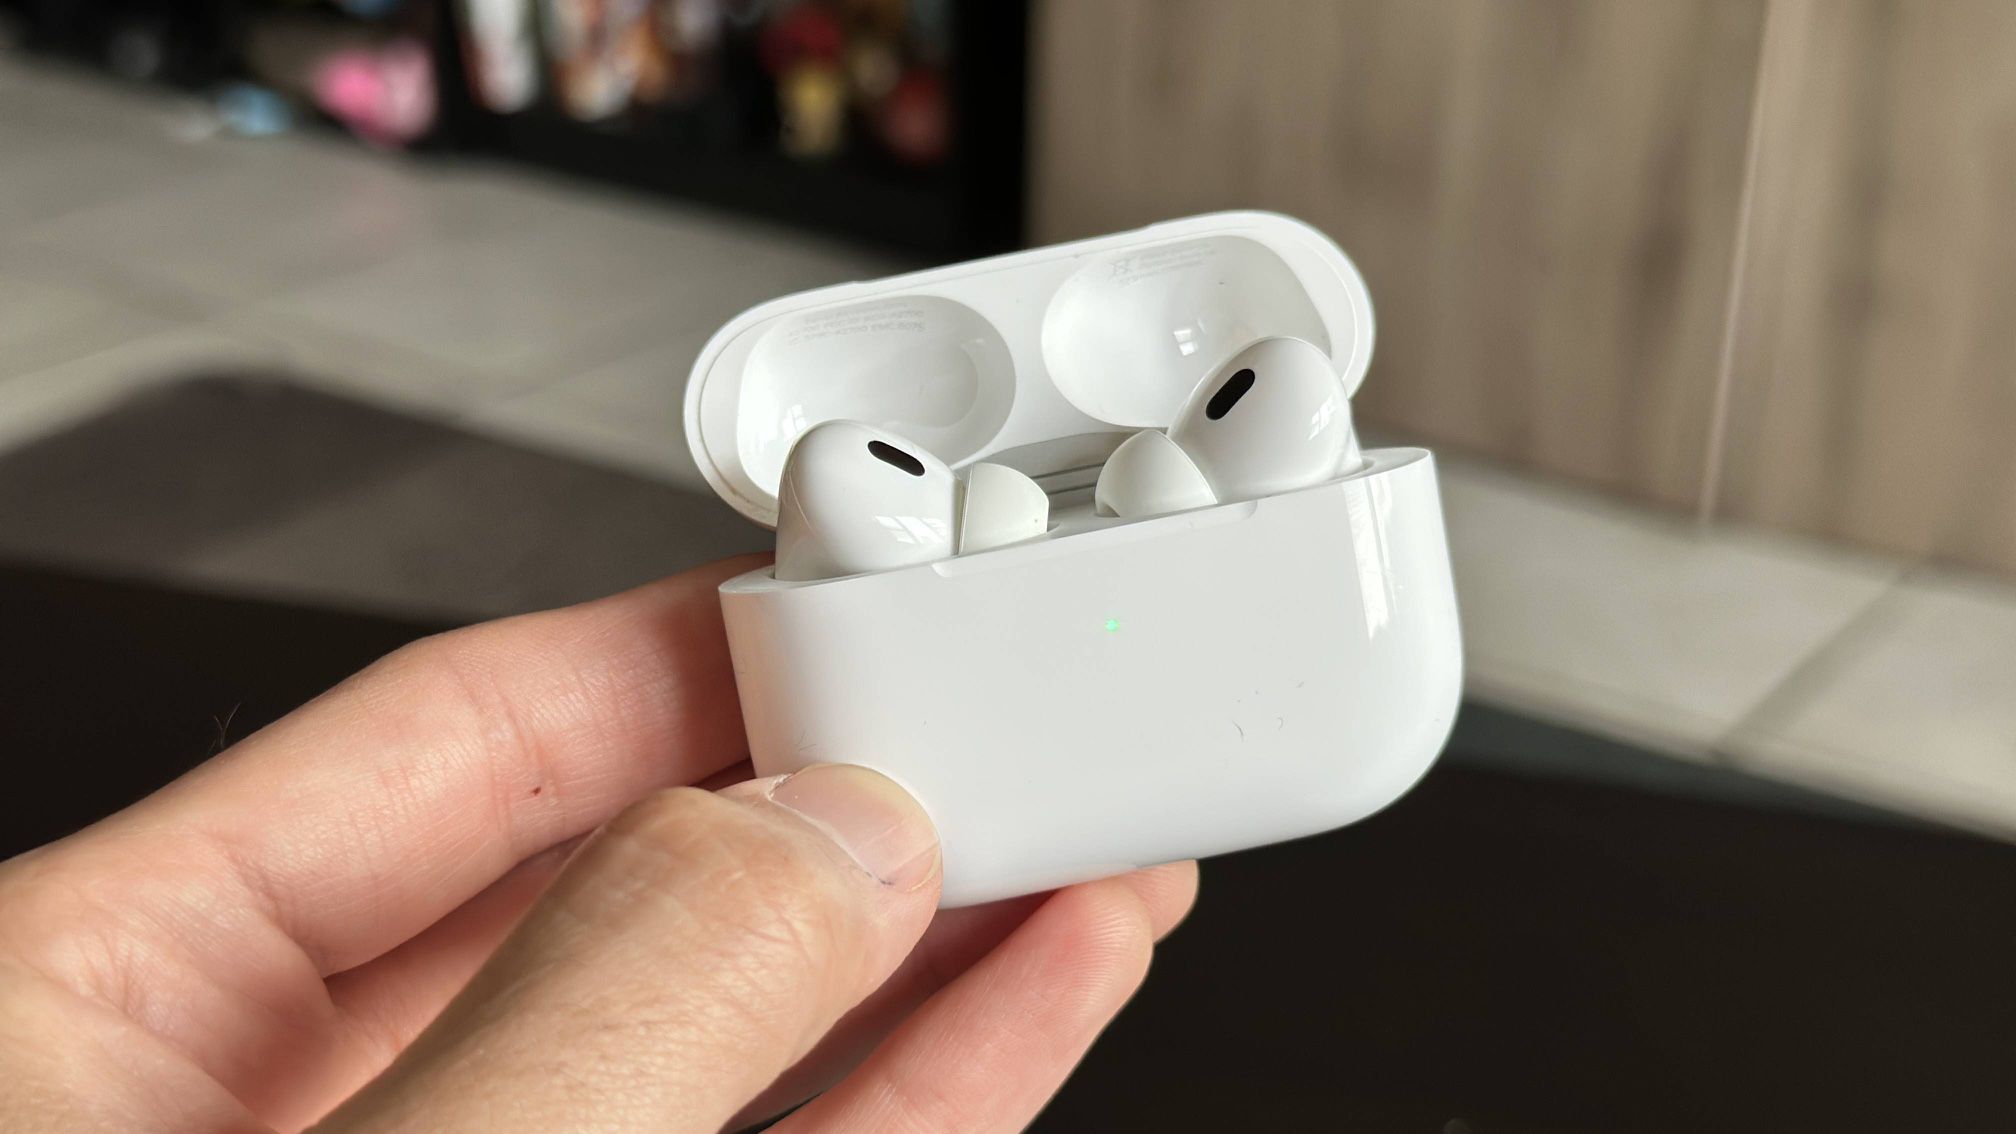 AirPods Pro 1st Generation 